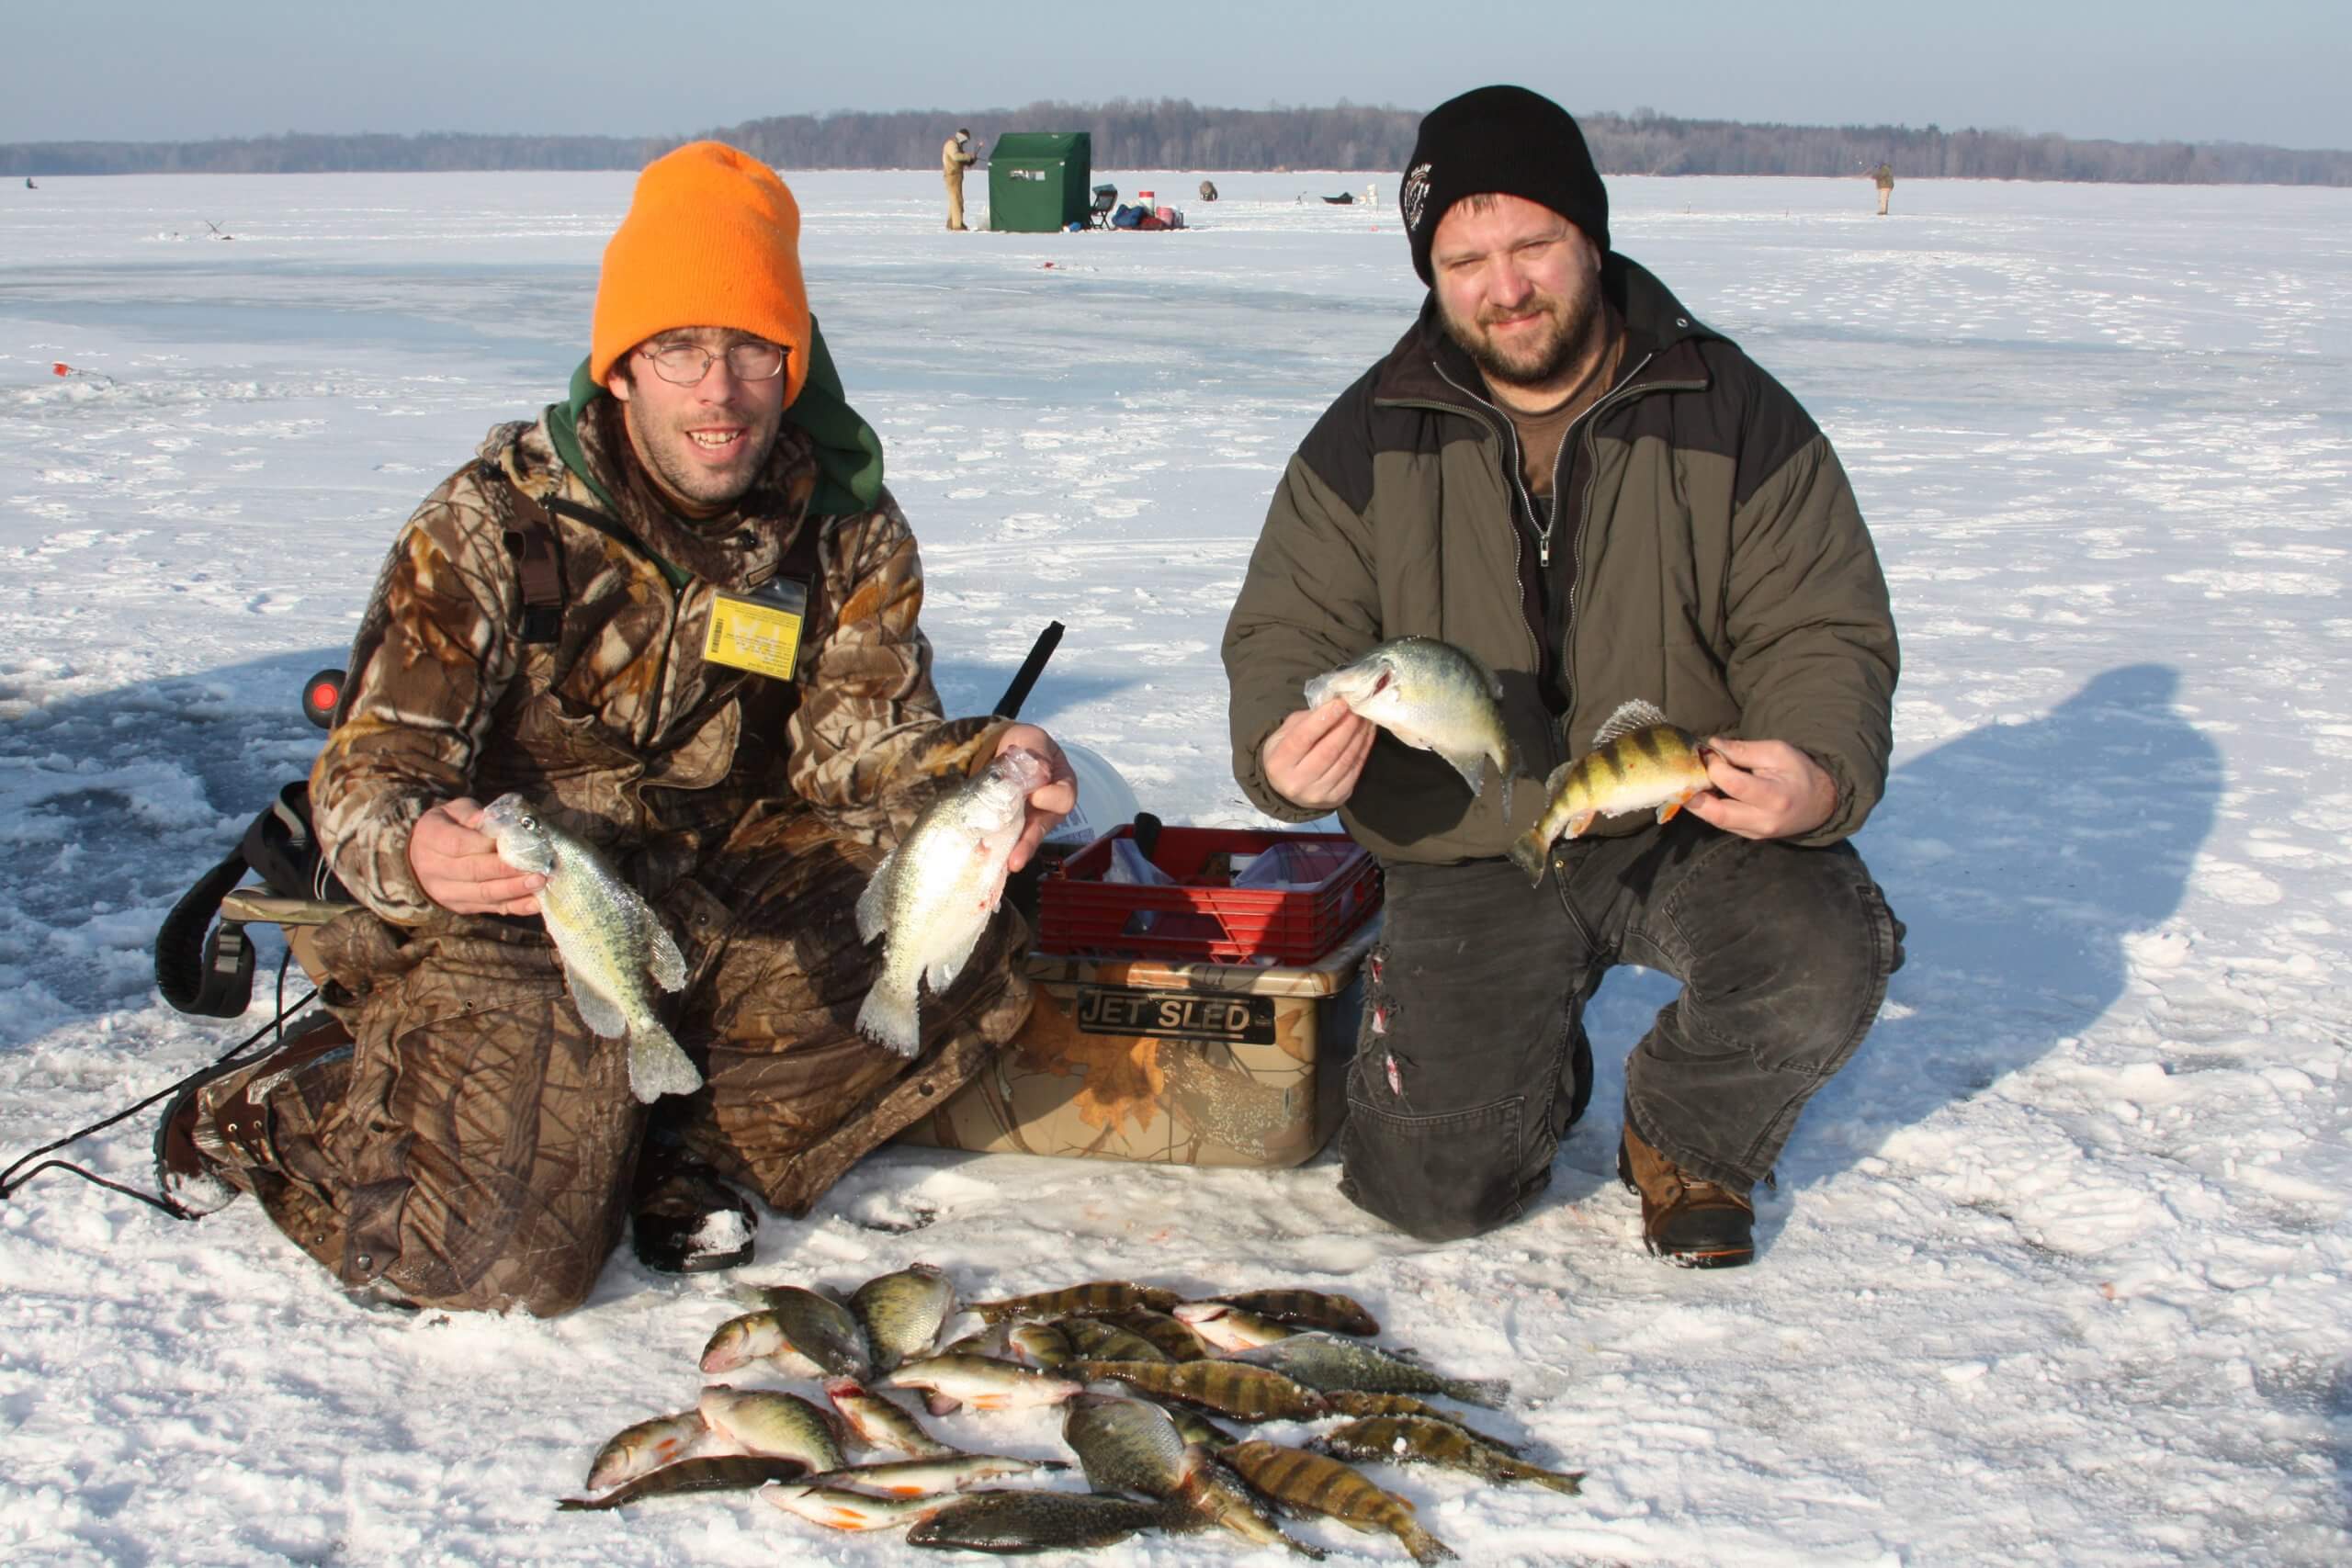 Ready for an Ice Fishing Adventure?